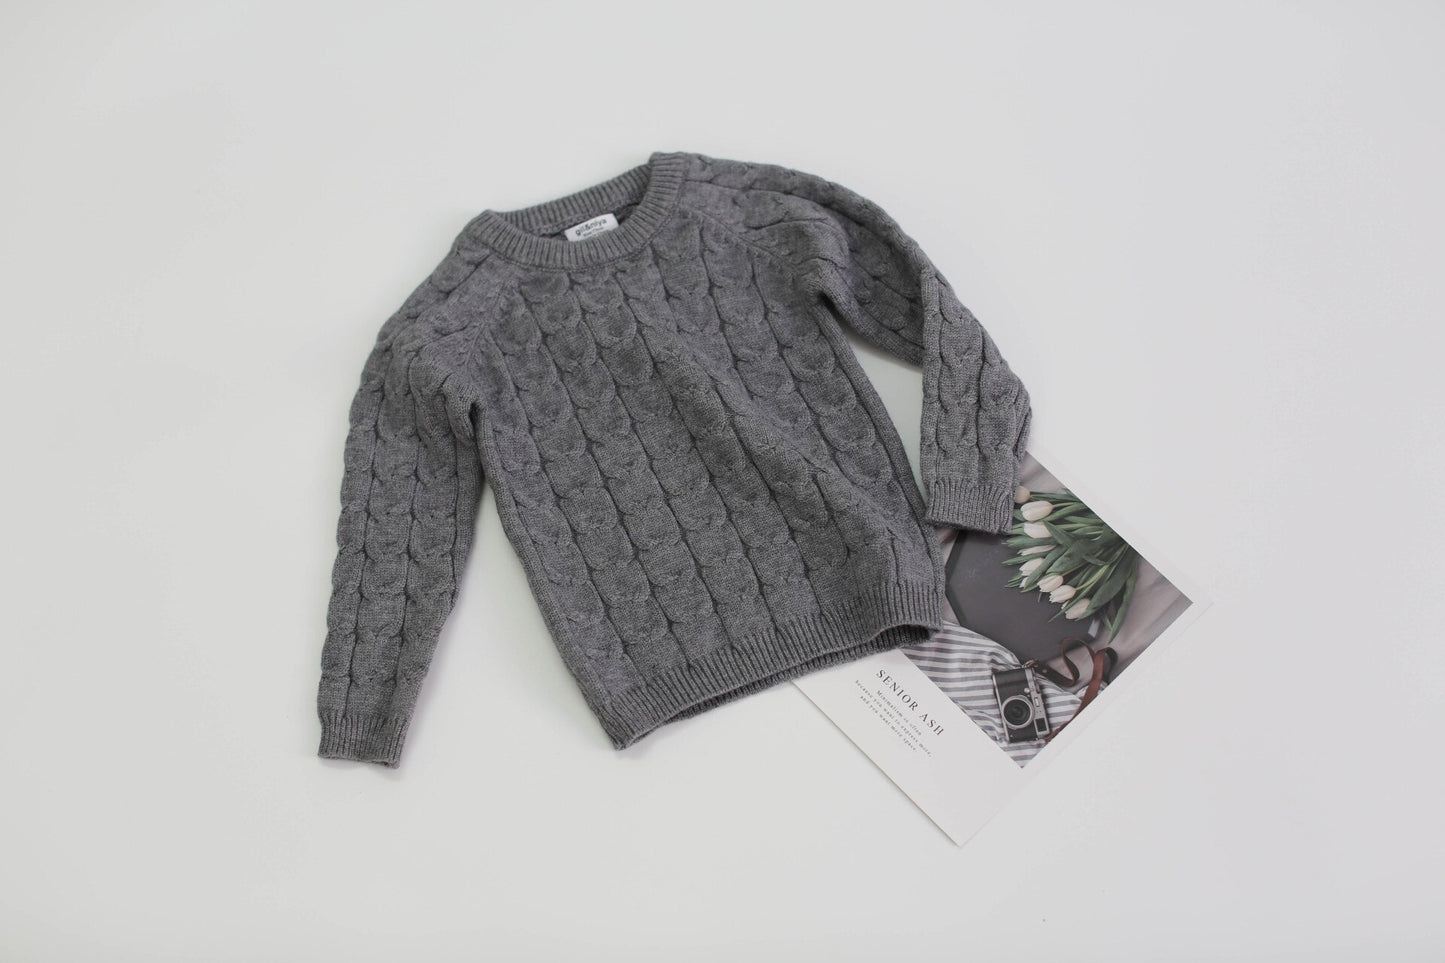 Knitted Baby Boys Girls Clothing Set, Sweater + Pants - Grey.